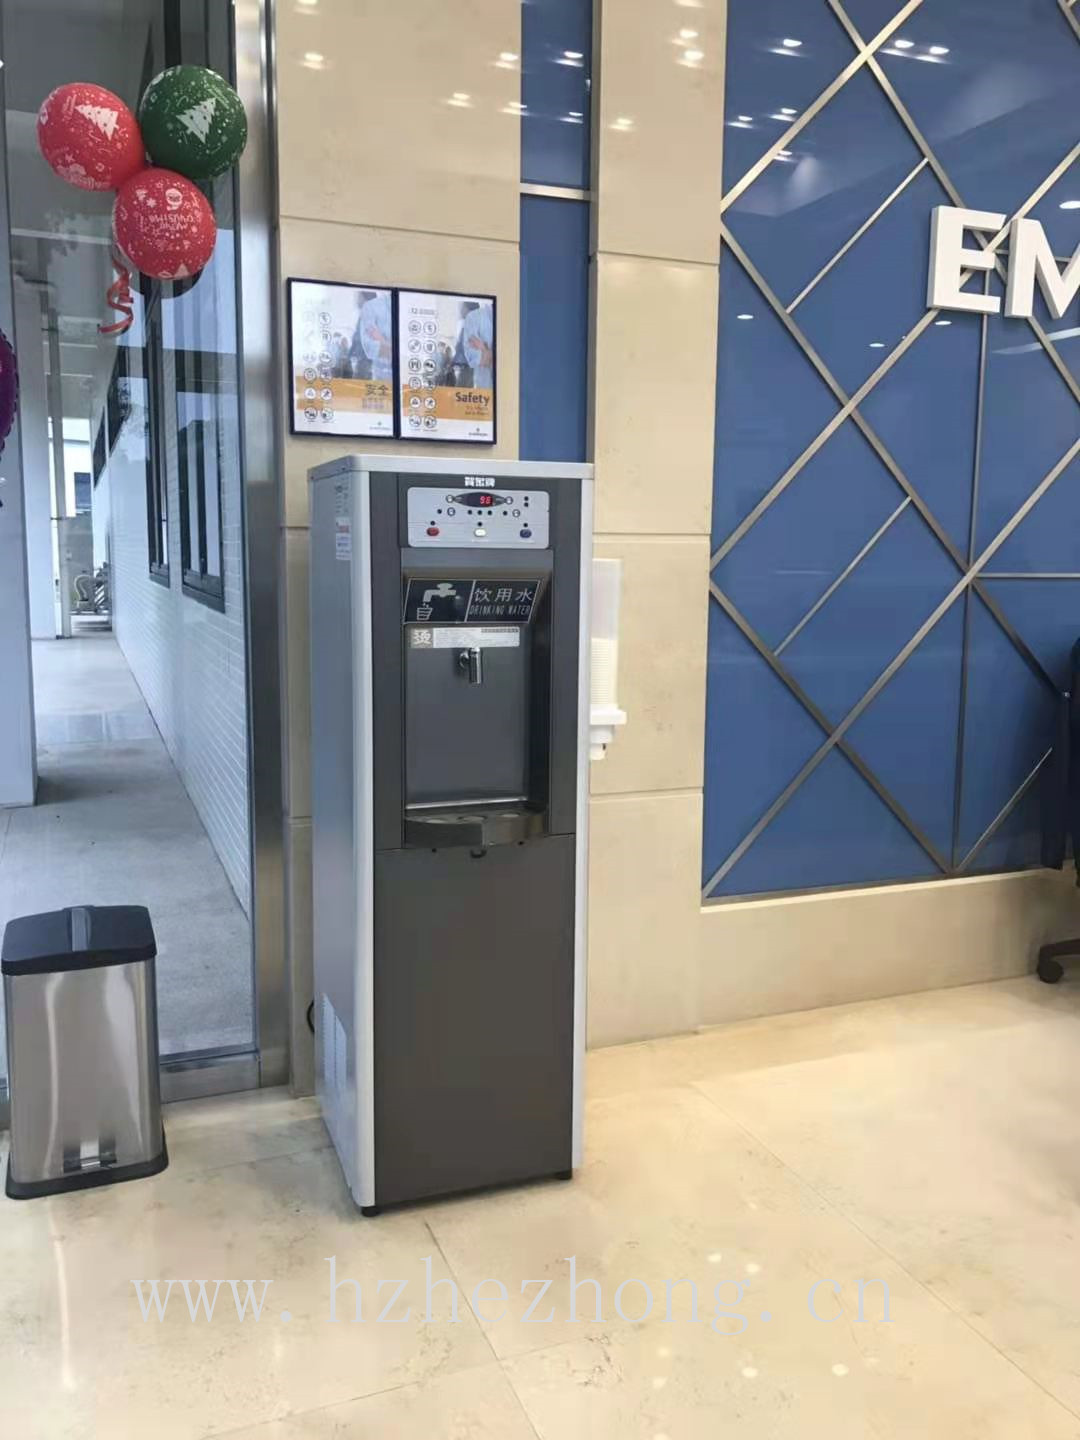 Emerson electric uses ACUO brand water dispenser